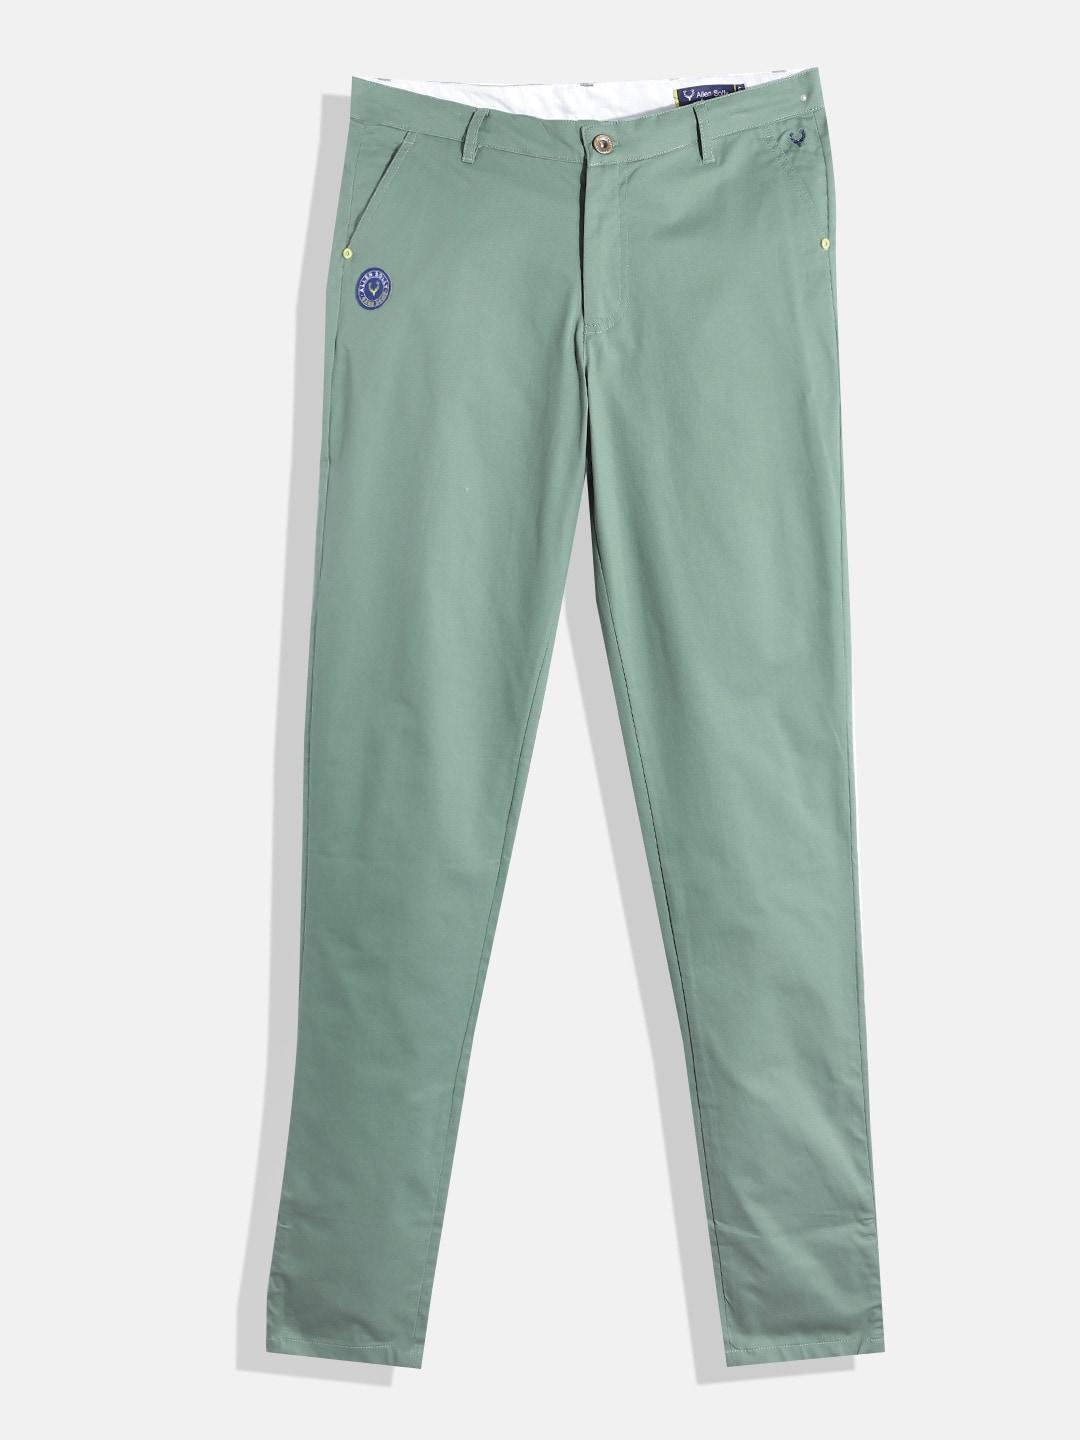 Allen Solly Junior Boys Sage Green Chino Trousers